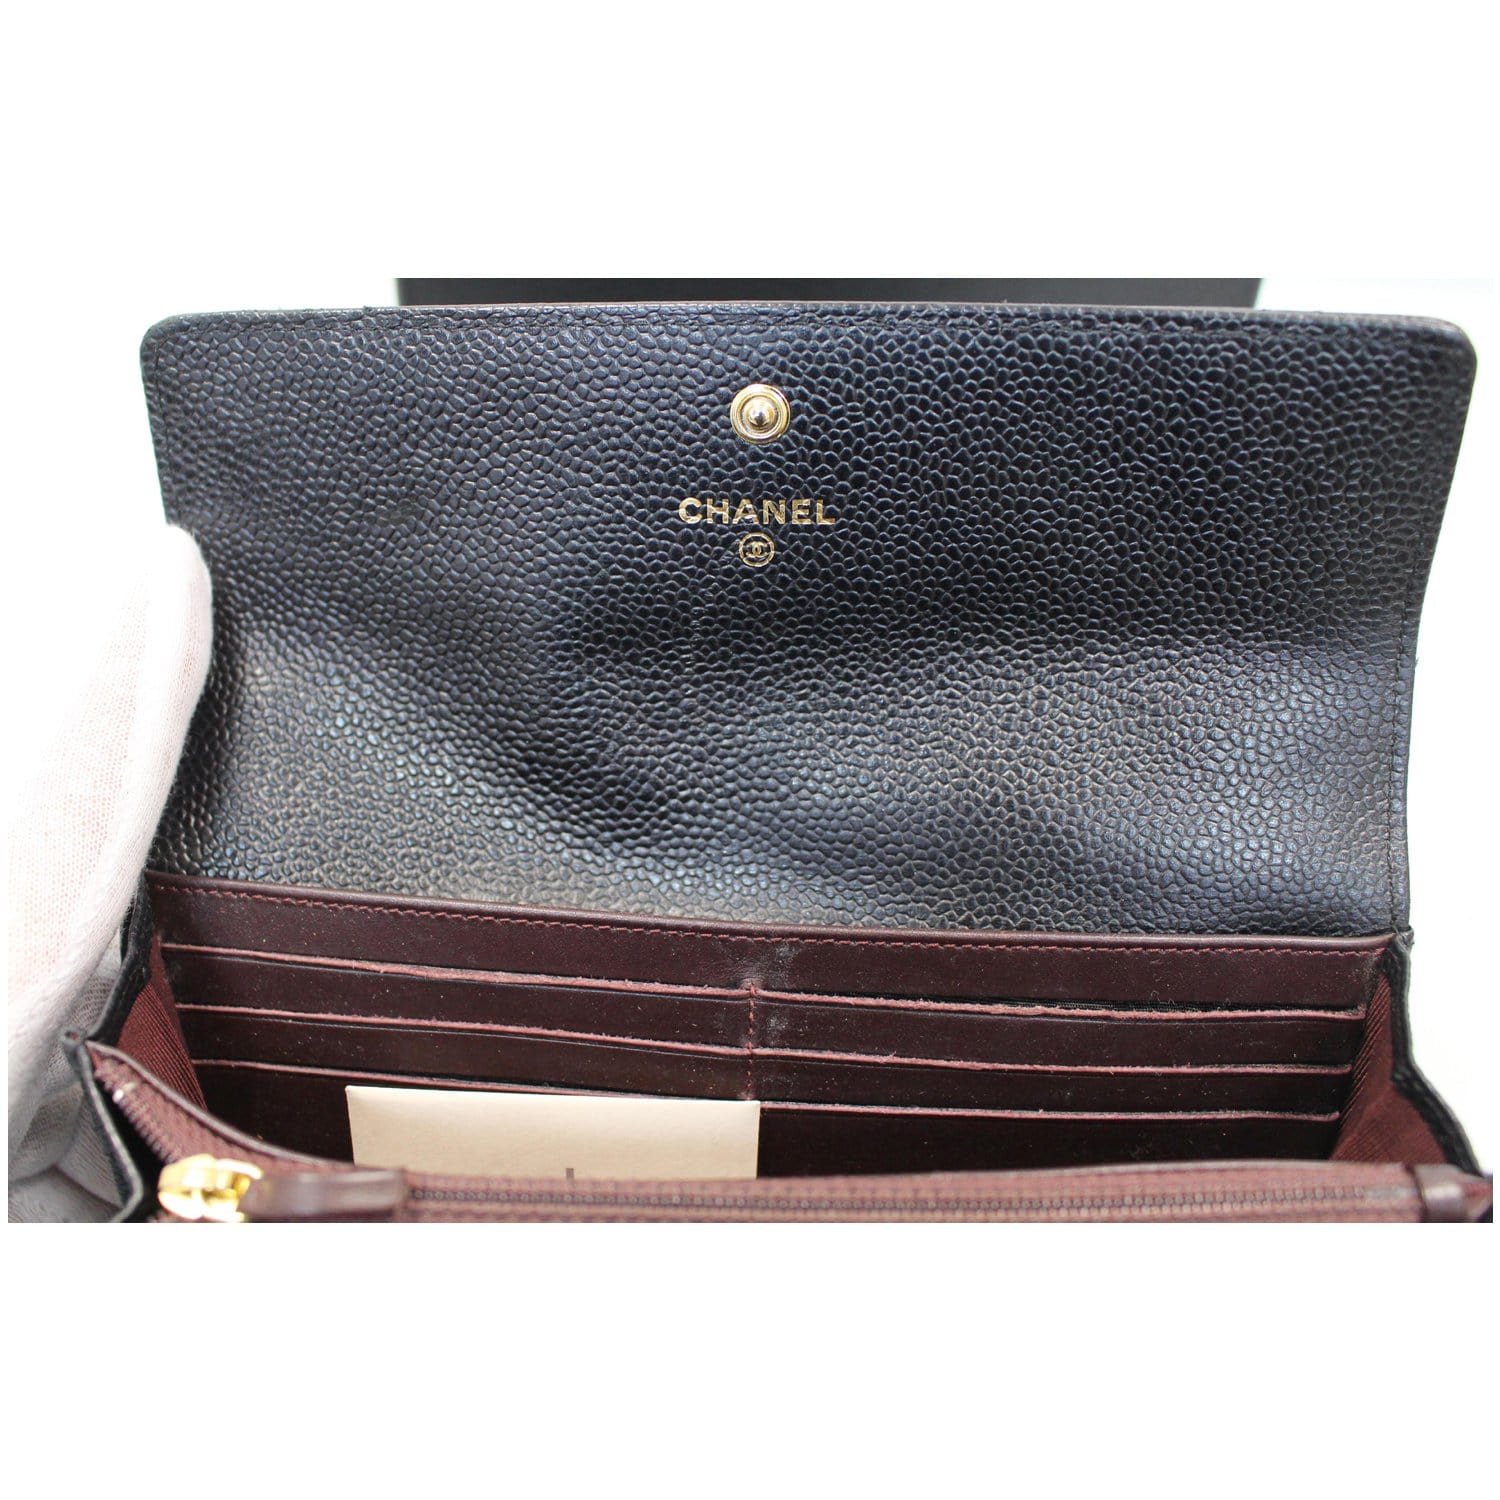 6 months review of CHANEL LONG FLAP WALLET 